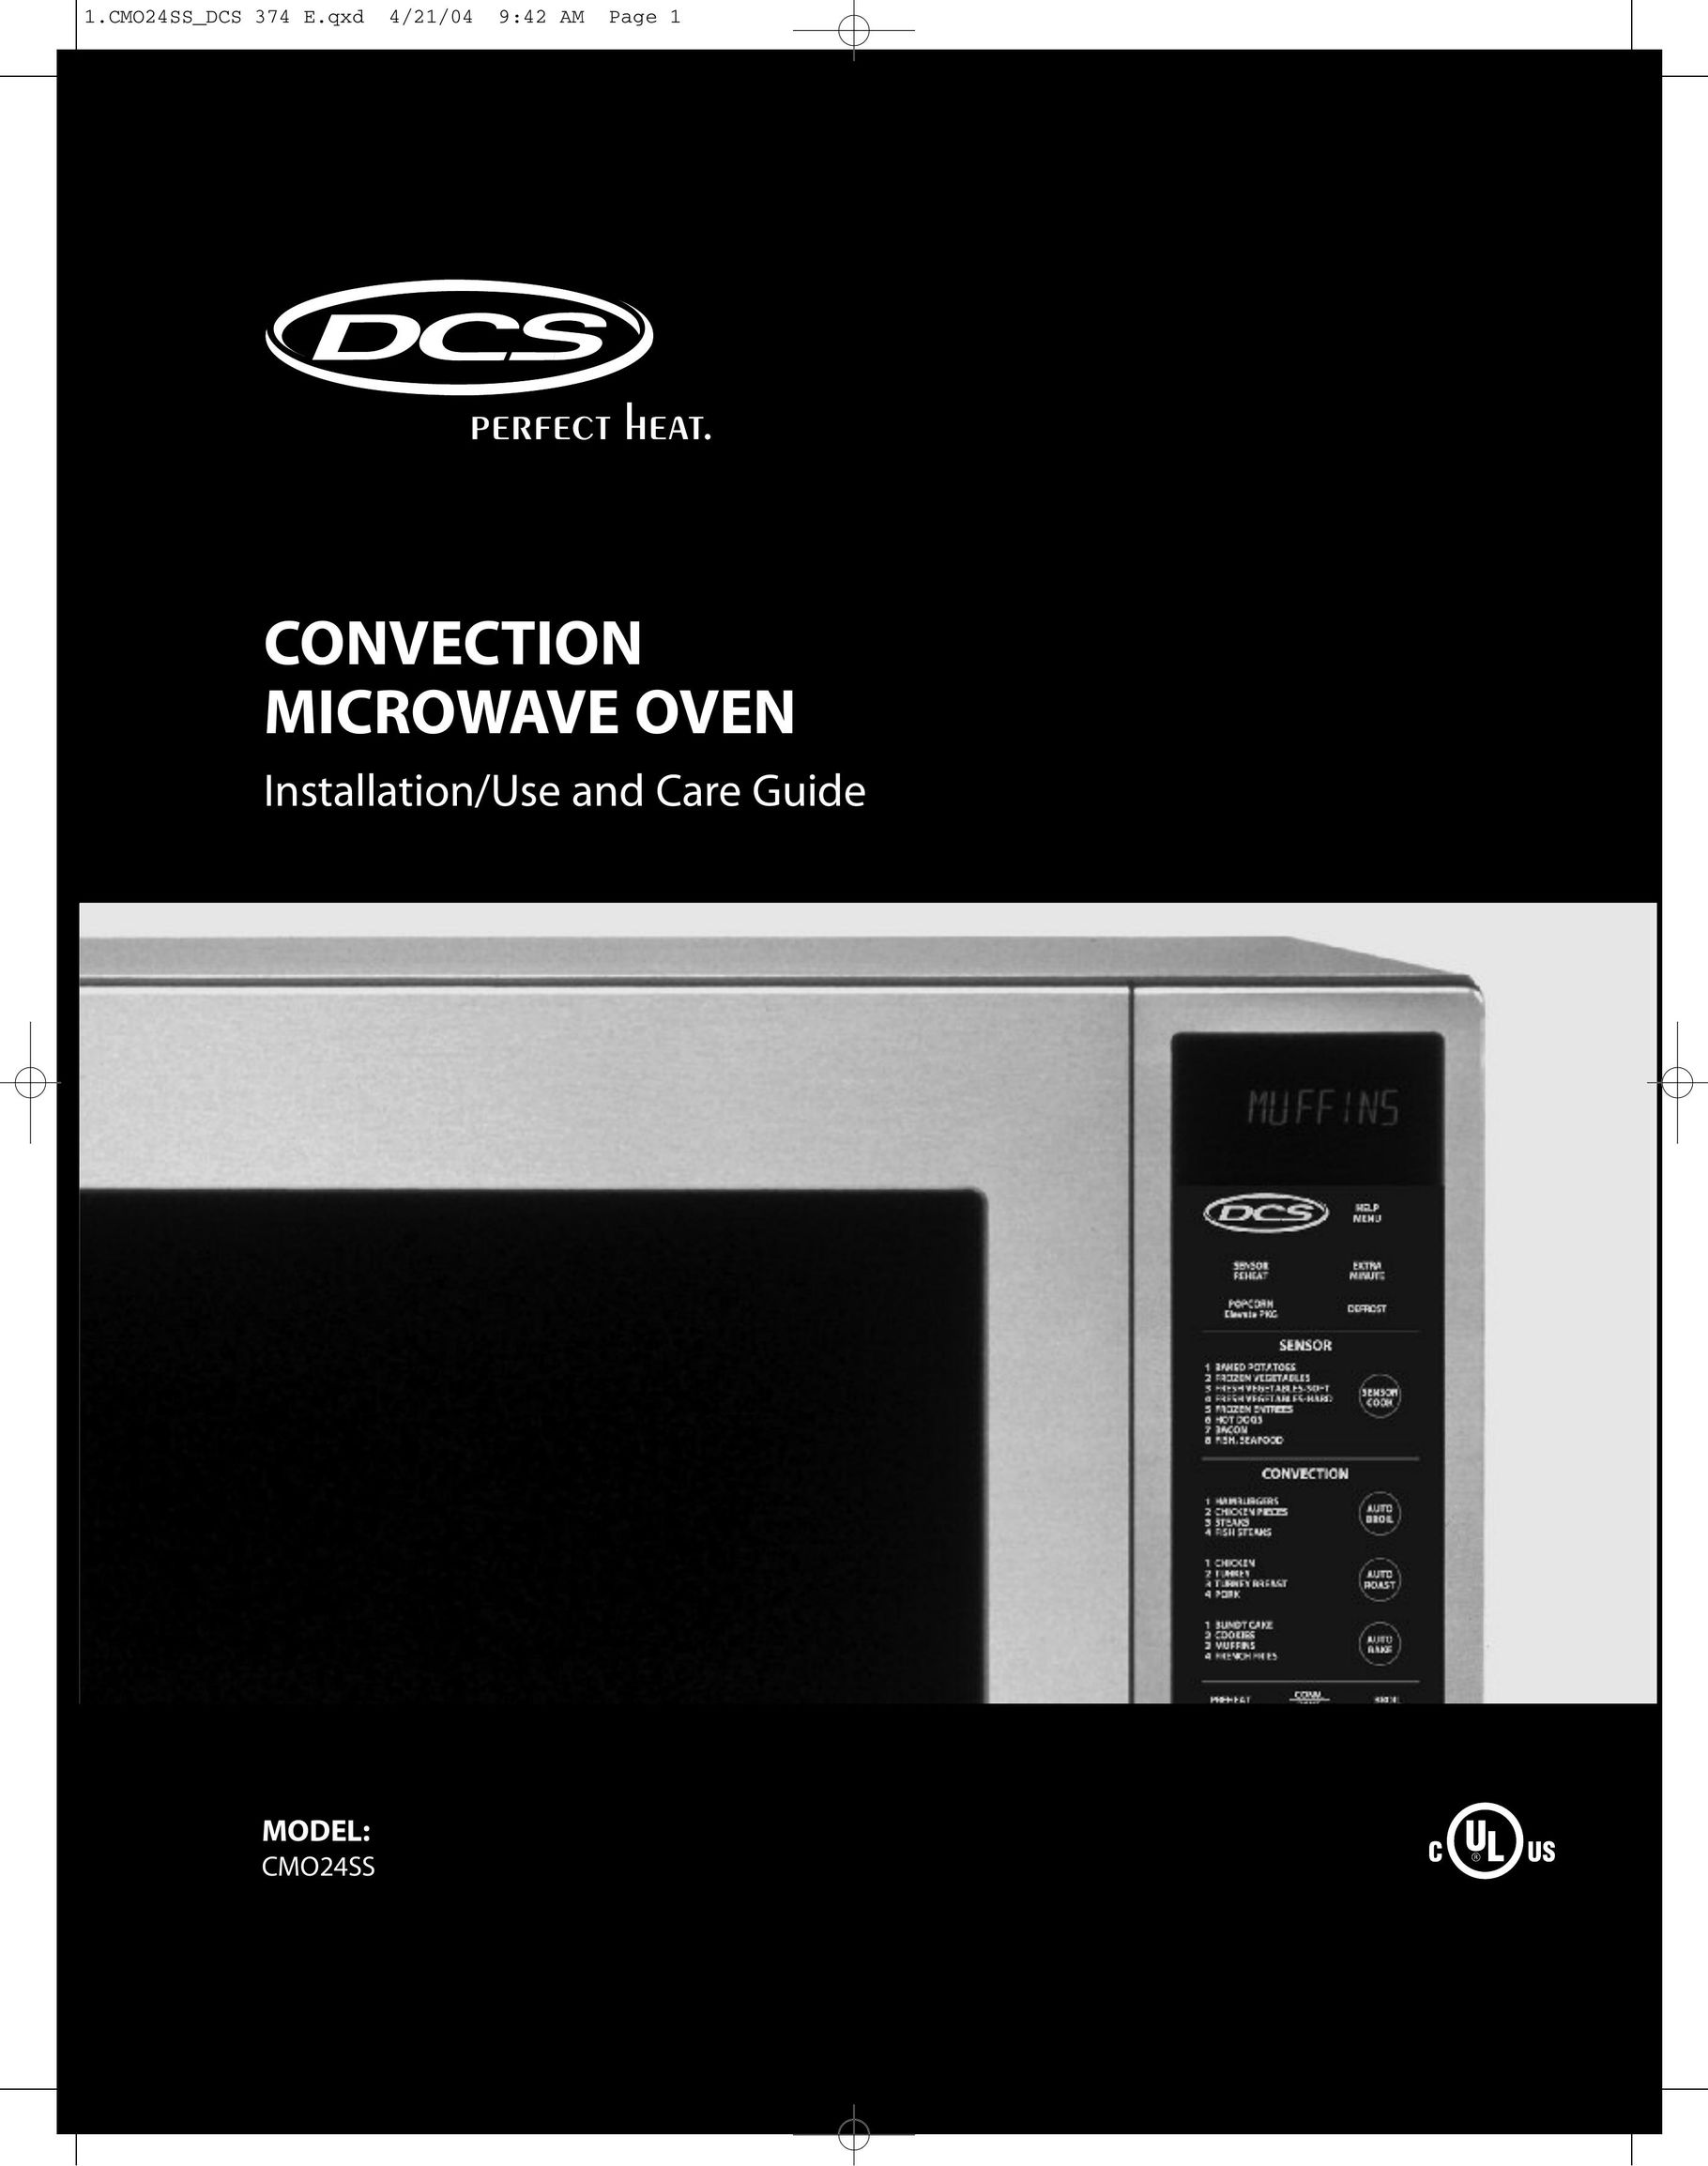 DCS CMO24SS Convection Oven User Manual